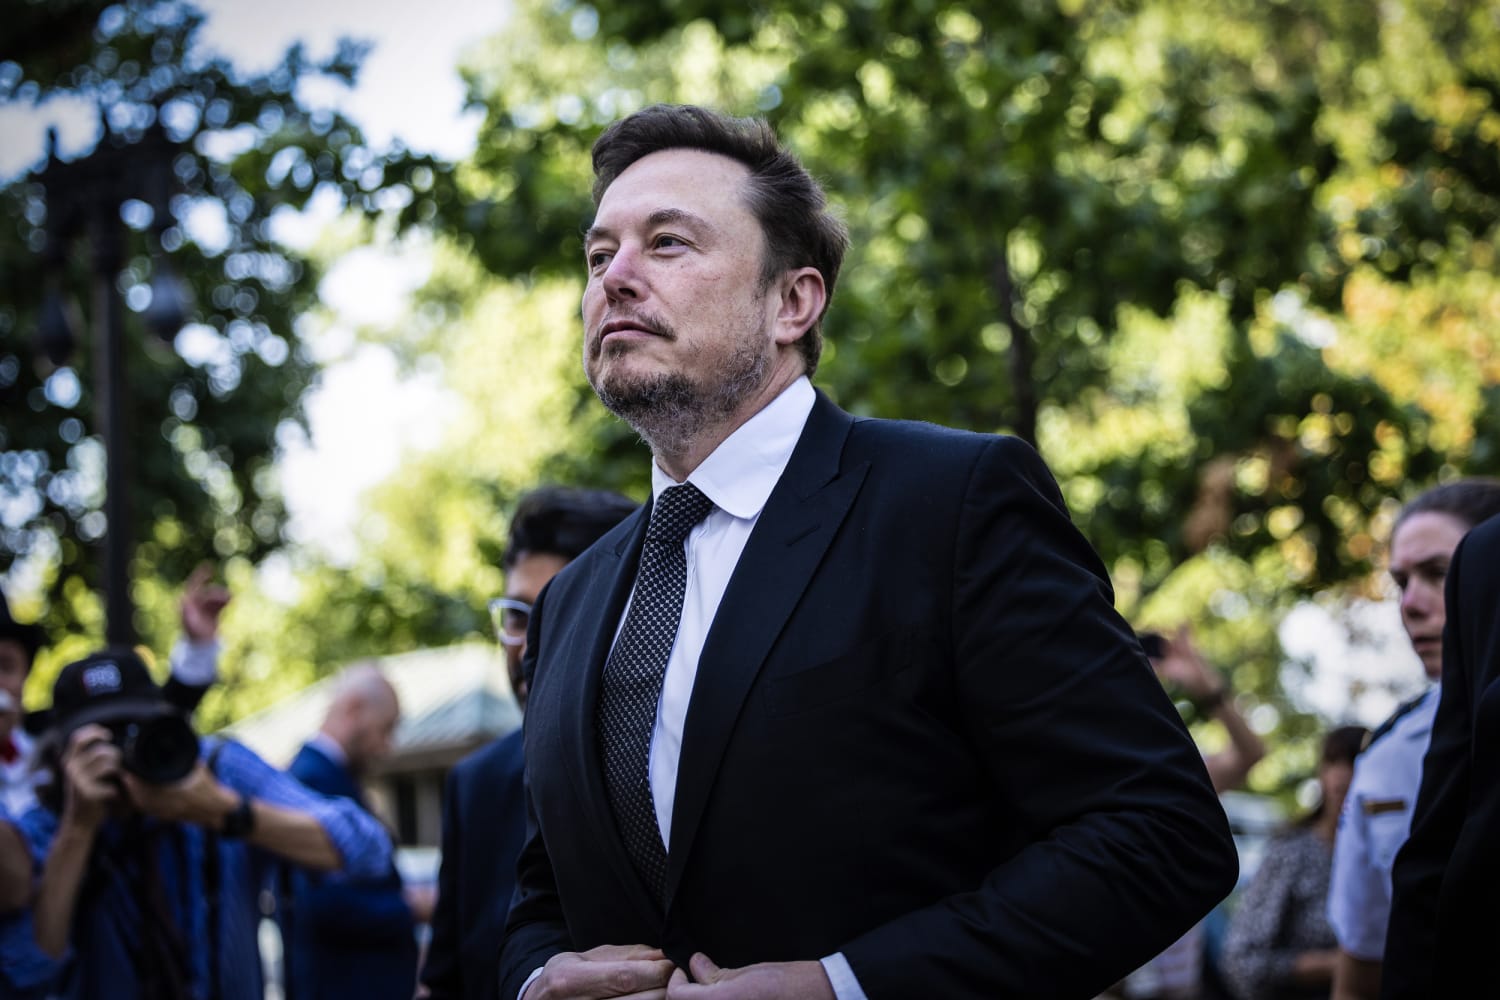 Move over, Elon Musk: who's the richest billionaire in 2023